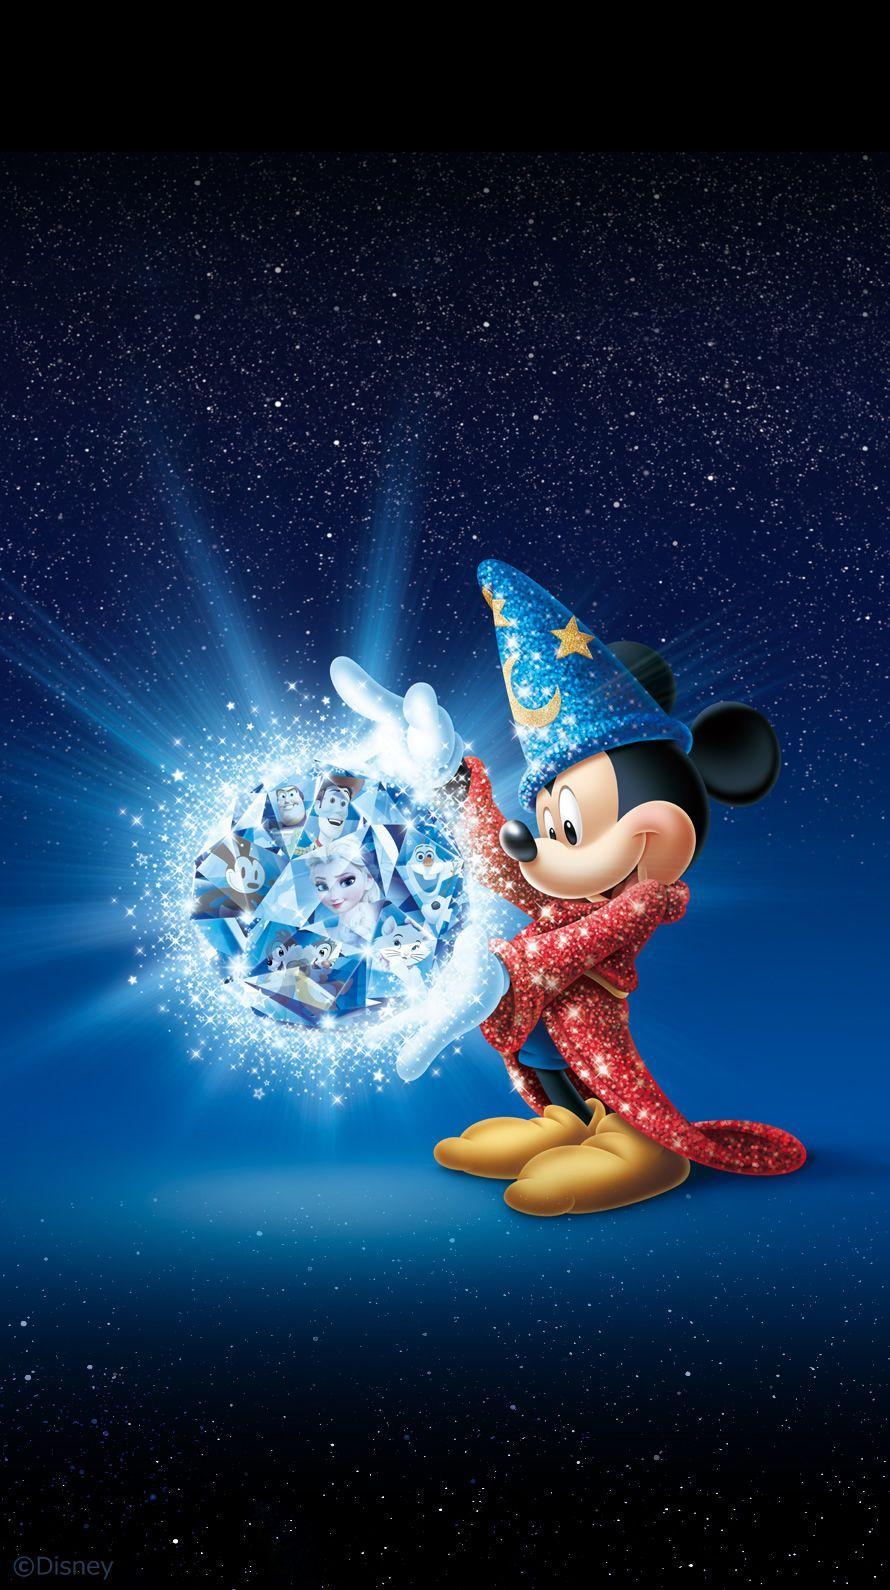 Sorcerer Mickey Mouse iPhone Wallpapers - Top Free Sorcerer Mickey